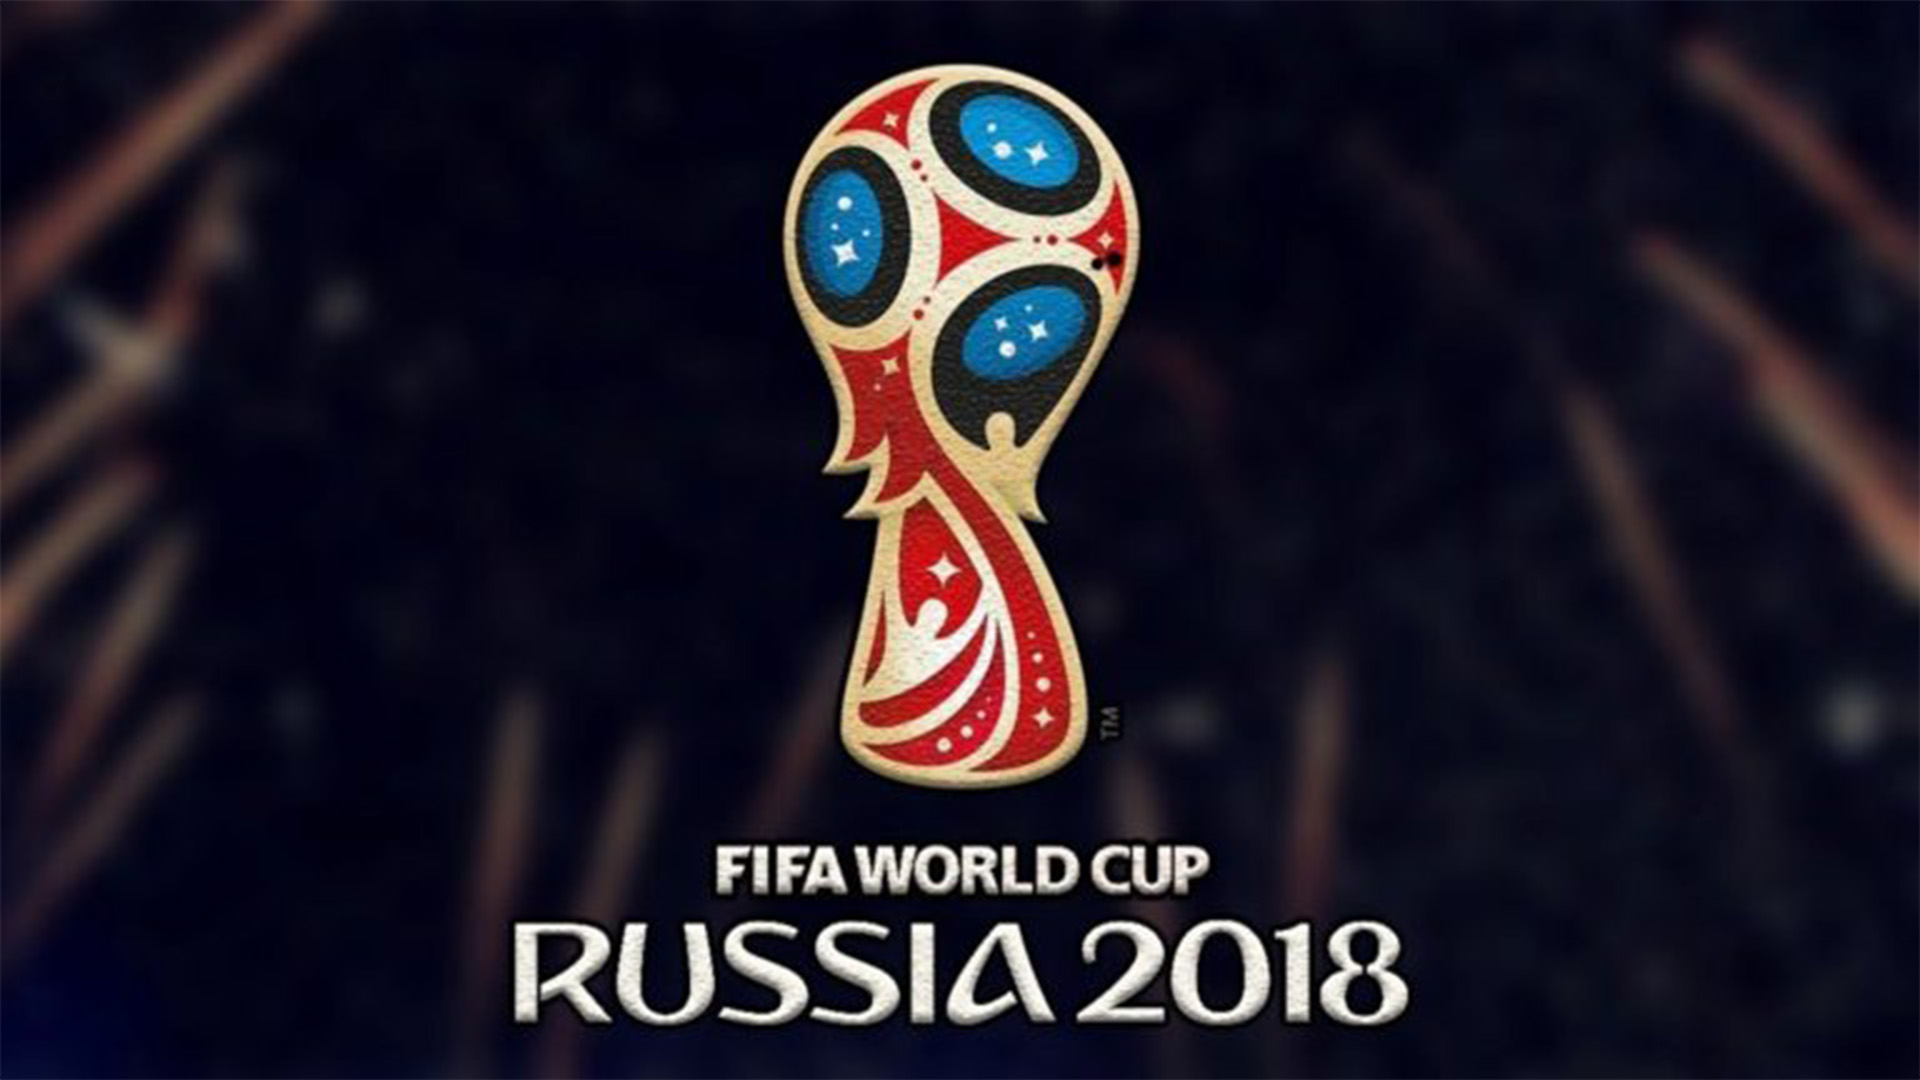 worldcup 2018 image